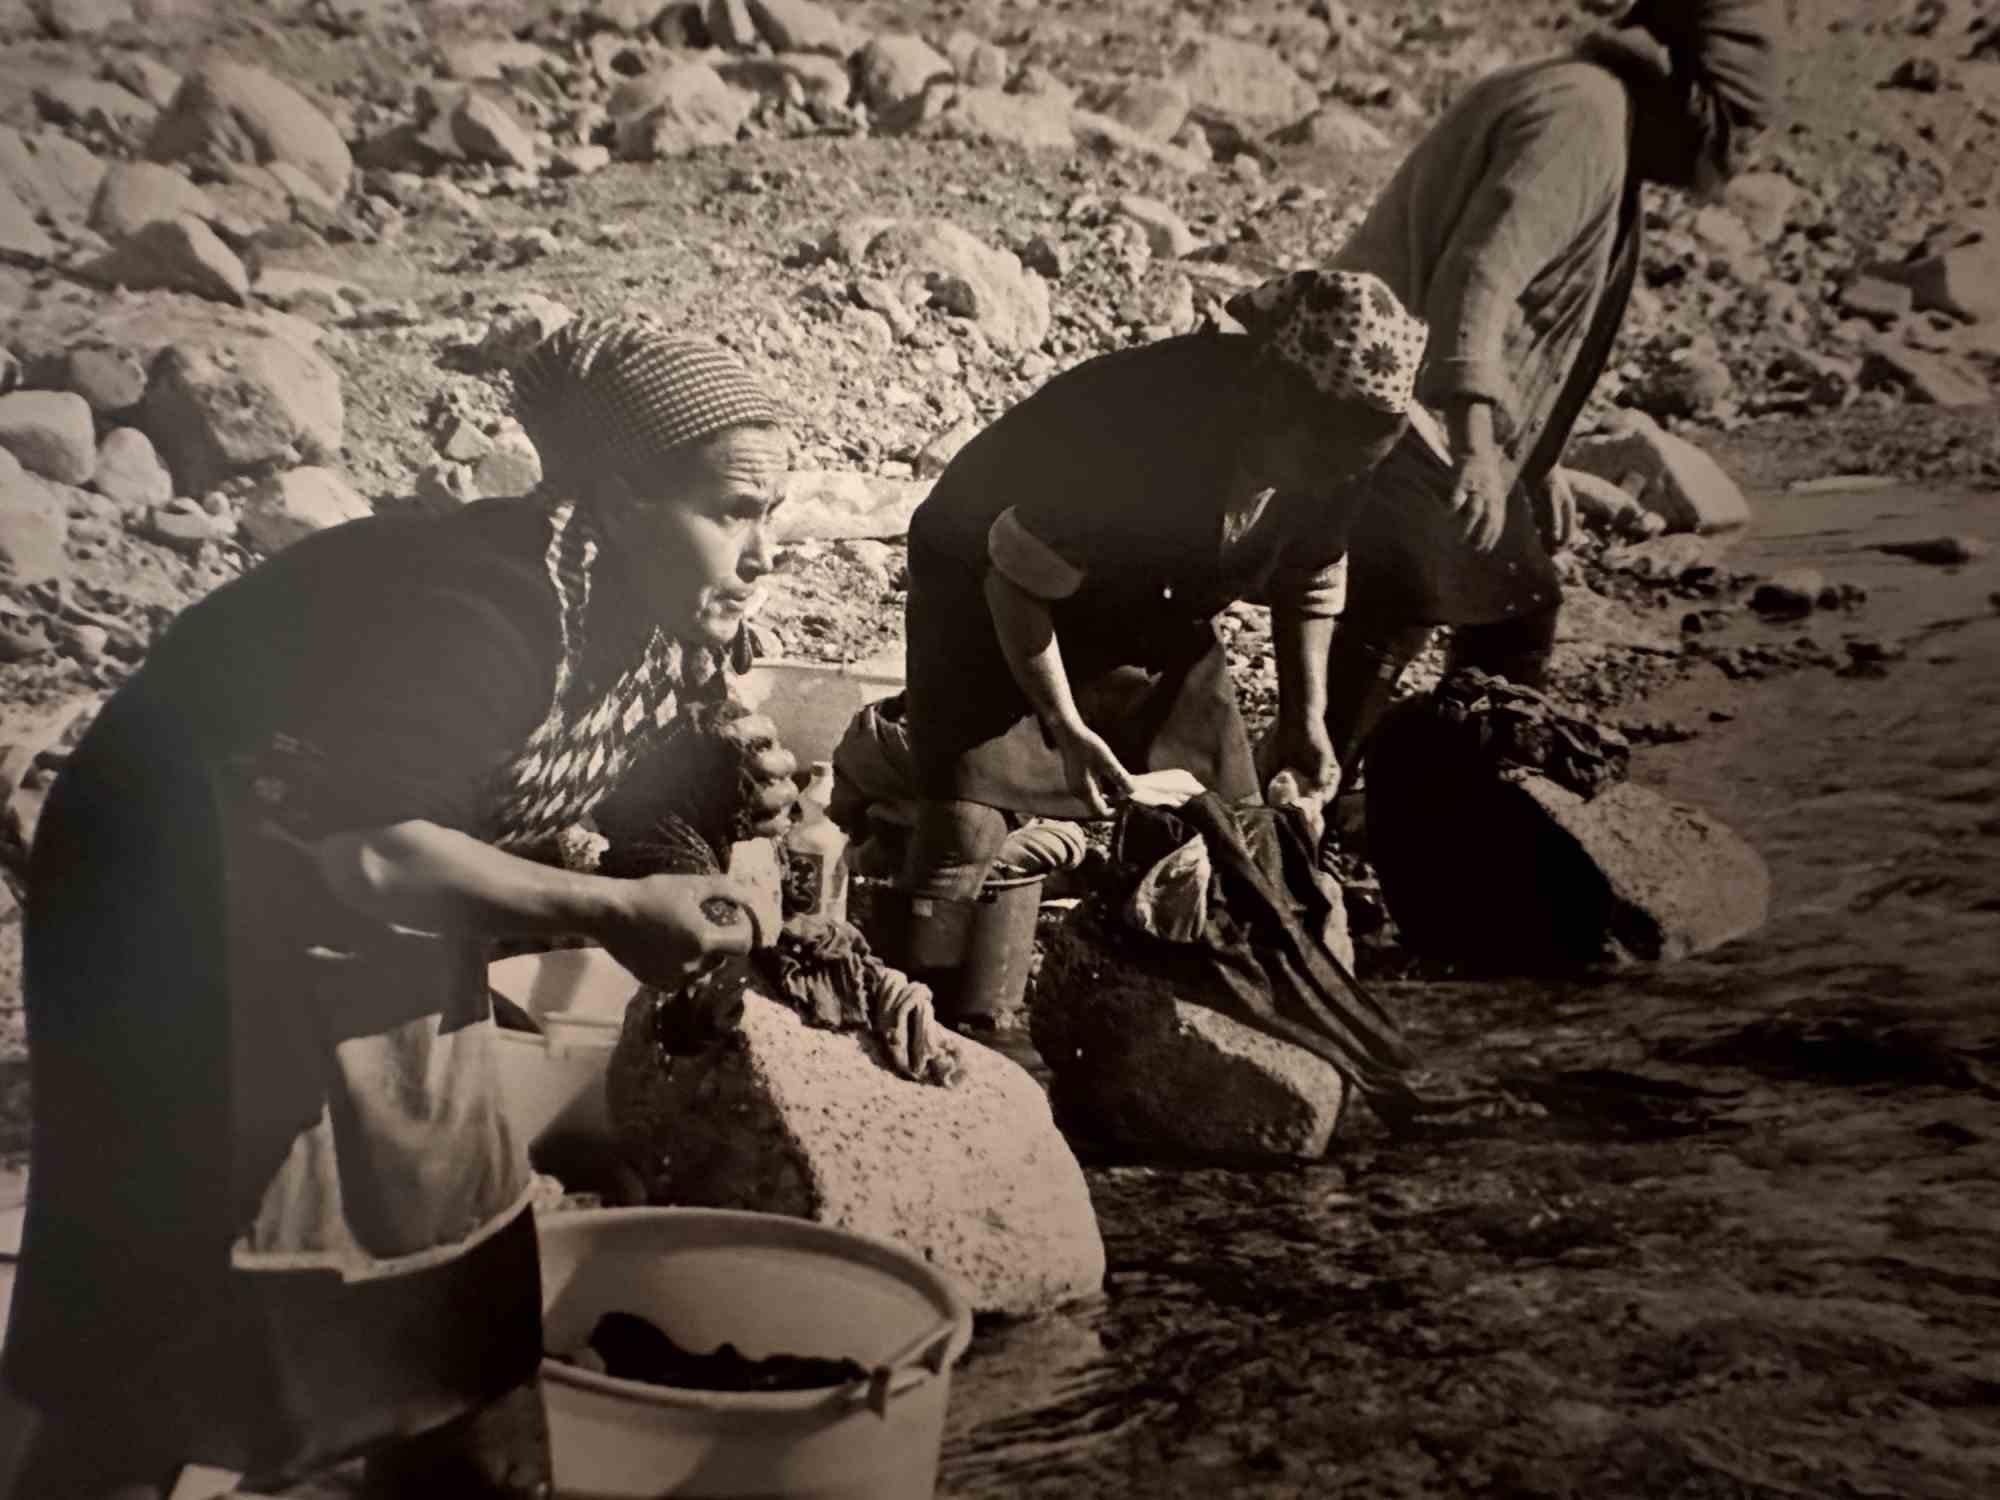 Unknown Figurative Photograph - Women Working -Women's Rights  Photos - 1950s